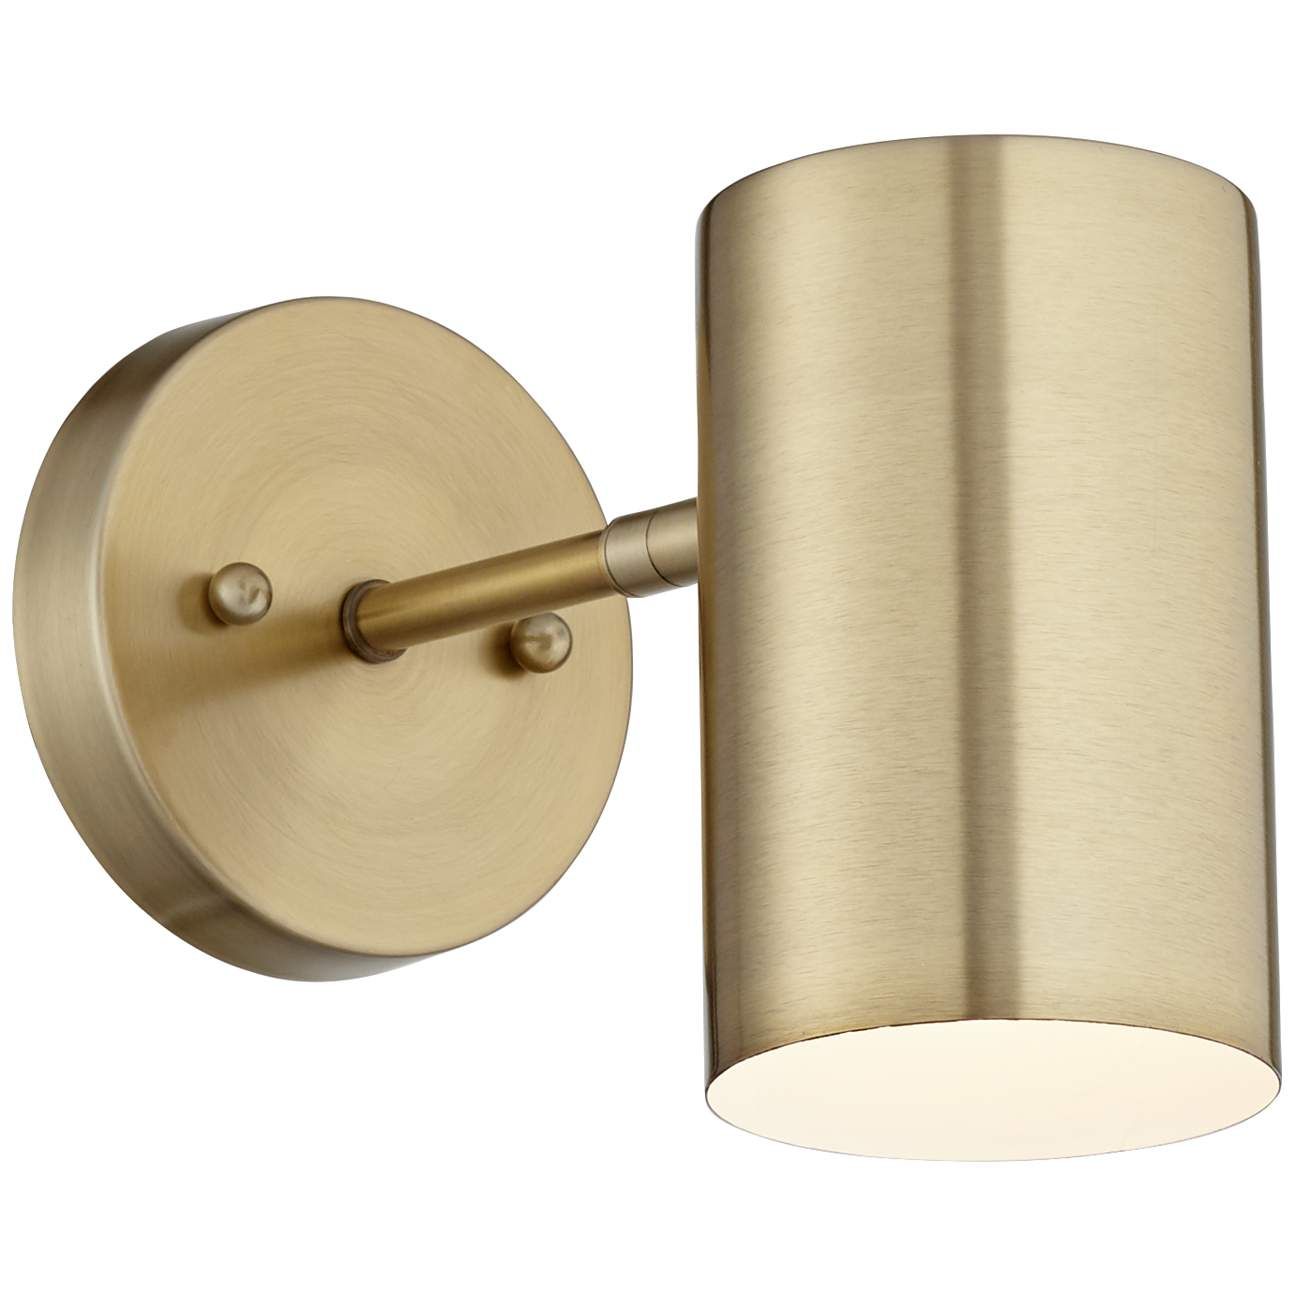 Carla Polished Brass Down-Light Hardwire Wall Lamp | Lamps Plus